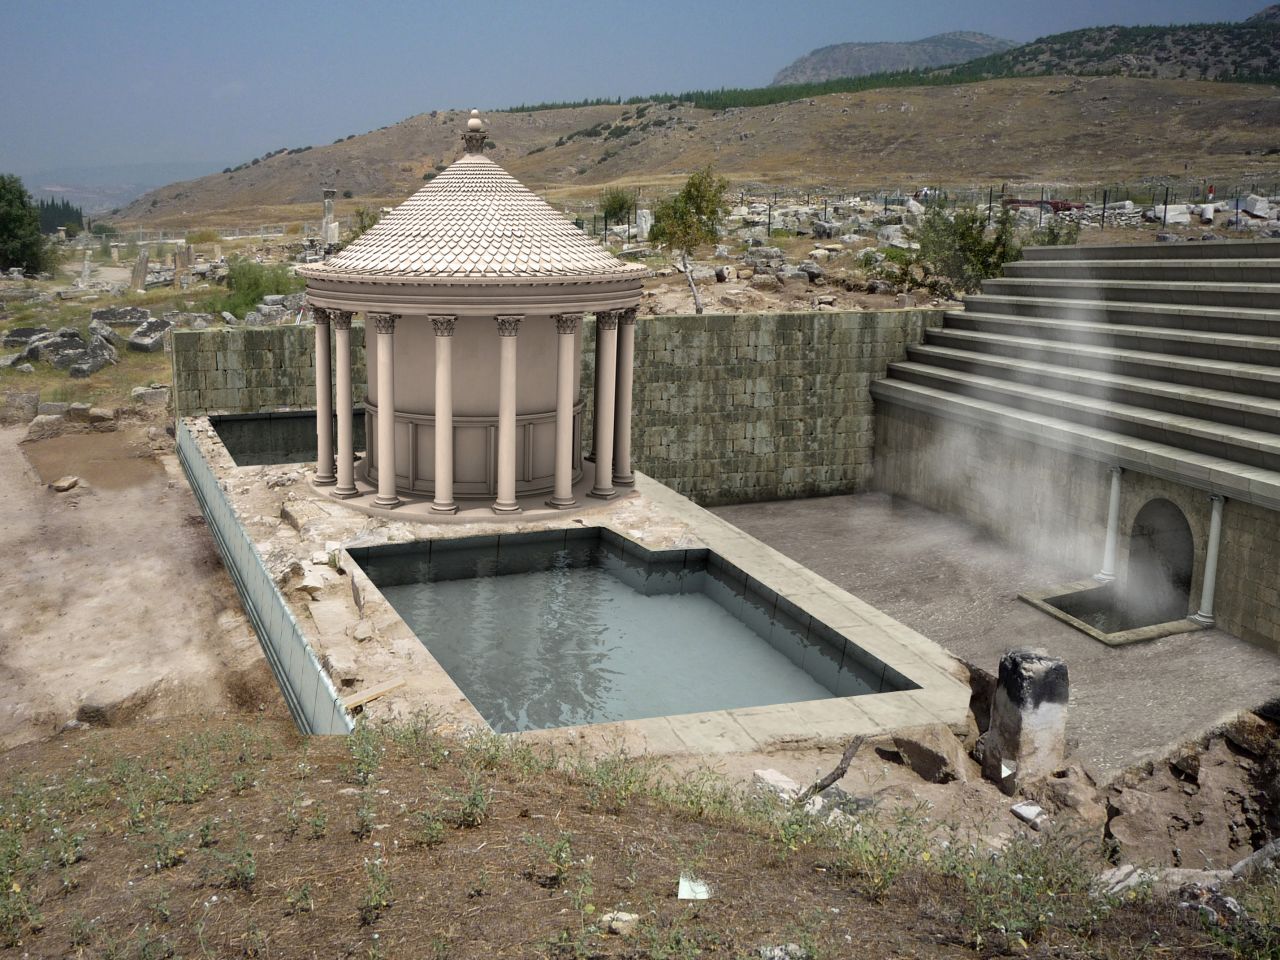 Scientists believe they have figured out the mystery behind a Greco-Roman temple where animals were reported to drop dead as part of a ritual sacrifice. Known as the "Plutonium," the temple consisted of a stone doorway that led to a cave-like grotto, established around 190 BC. A team of Italian archaeologists rediscovered the cave in 2013 -- this is their 3D virtual reconstruction of the site.